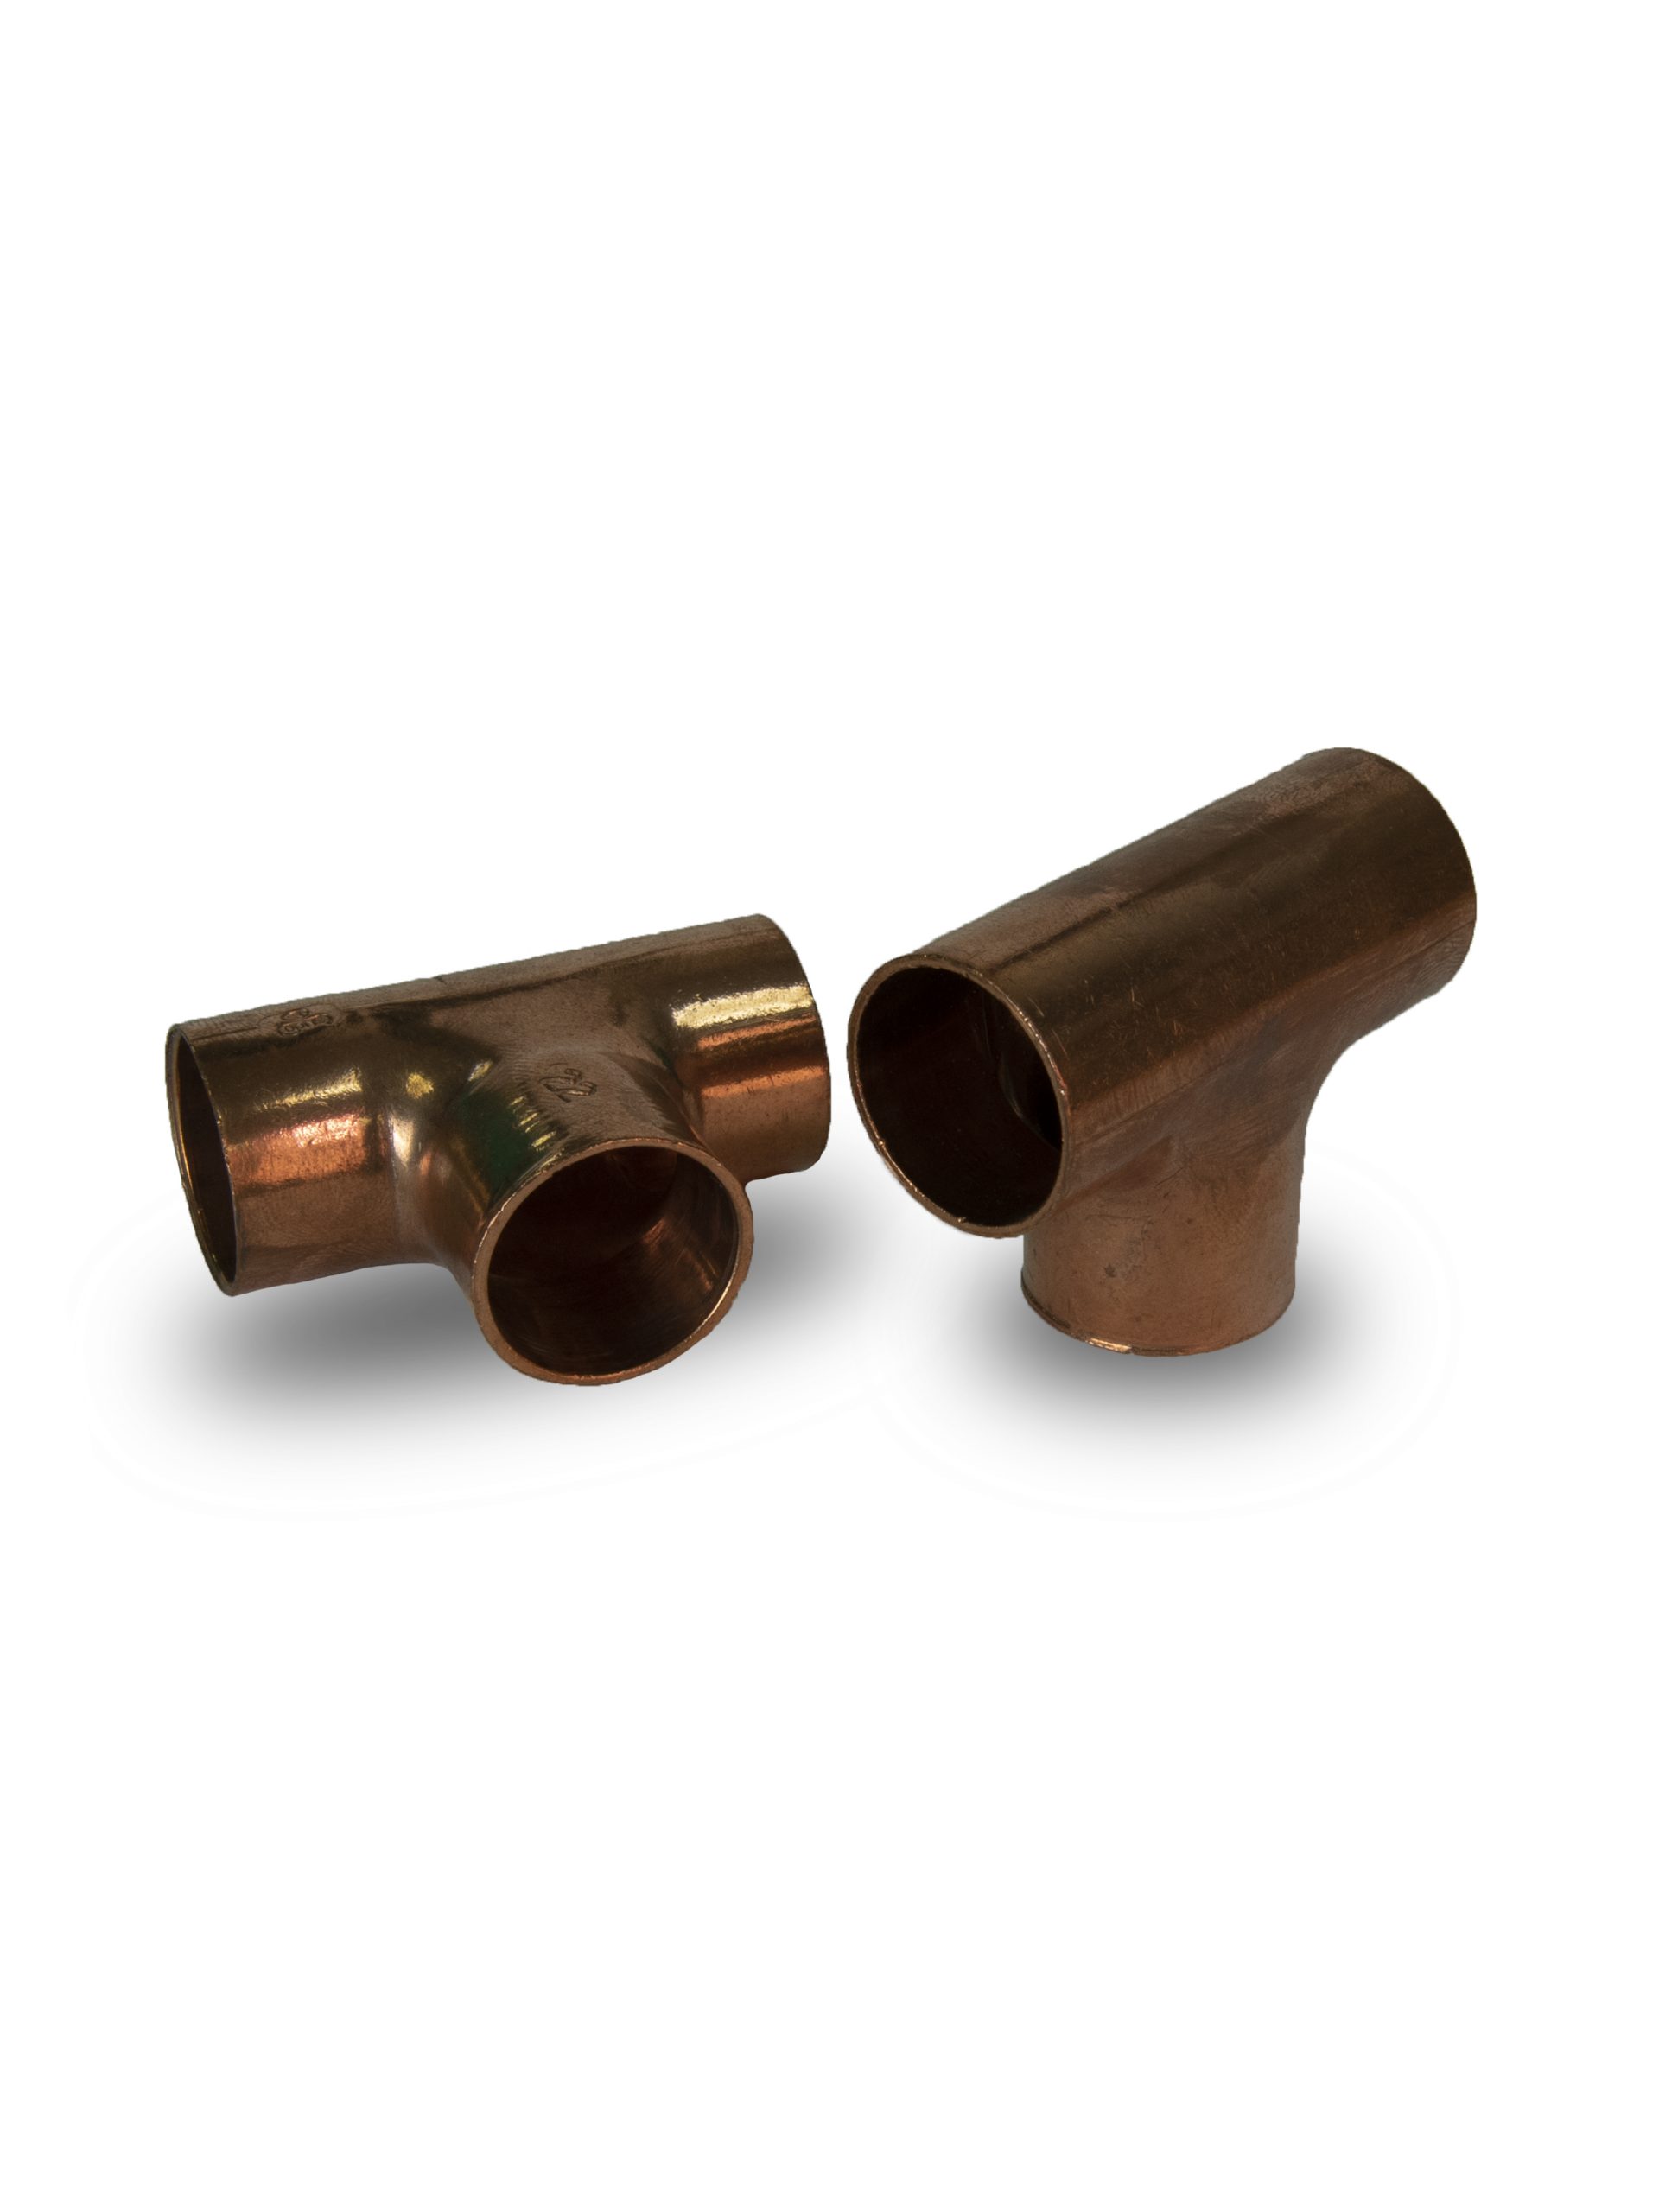 COPPER TEE 20MM, COMAP-CLESSE from Gas Equipment Company Llc Abu Dhabi, UNITED ARAB EMIRATES